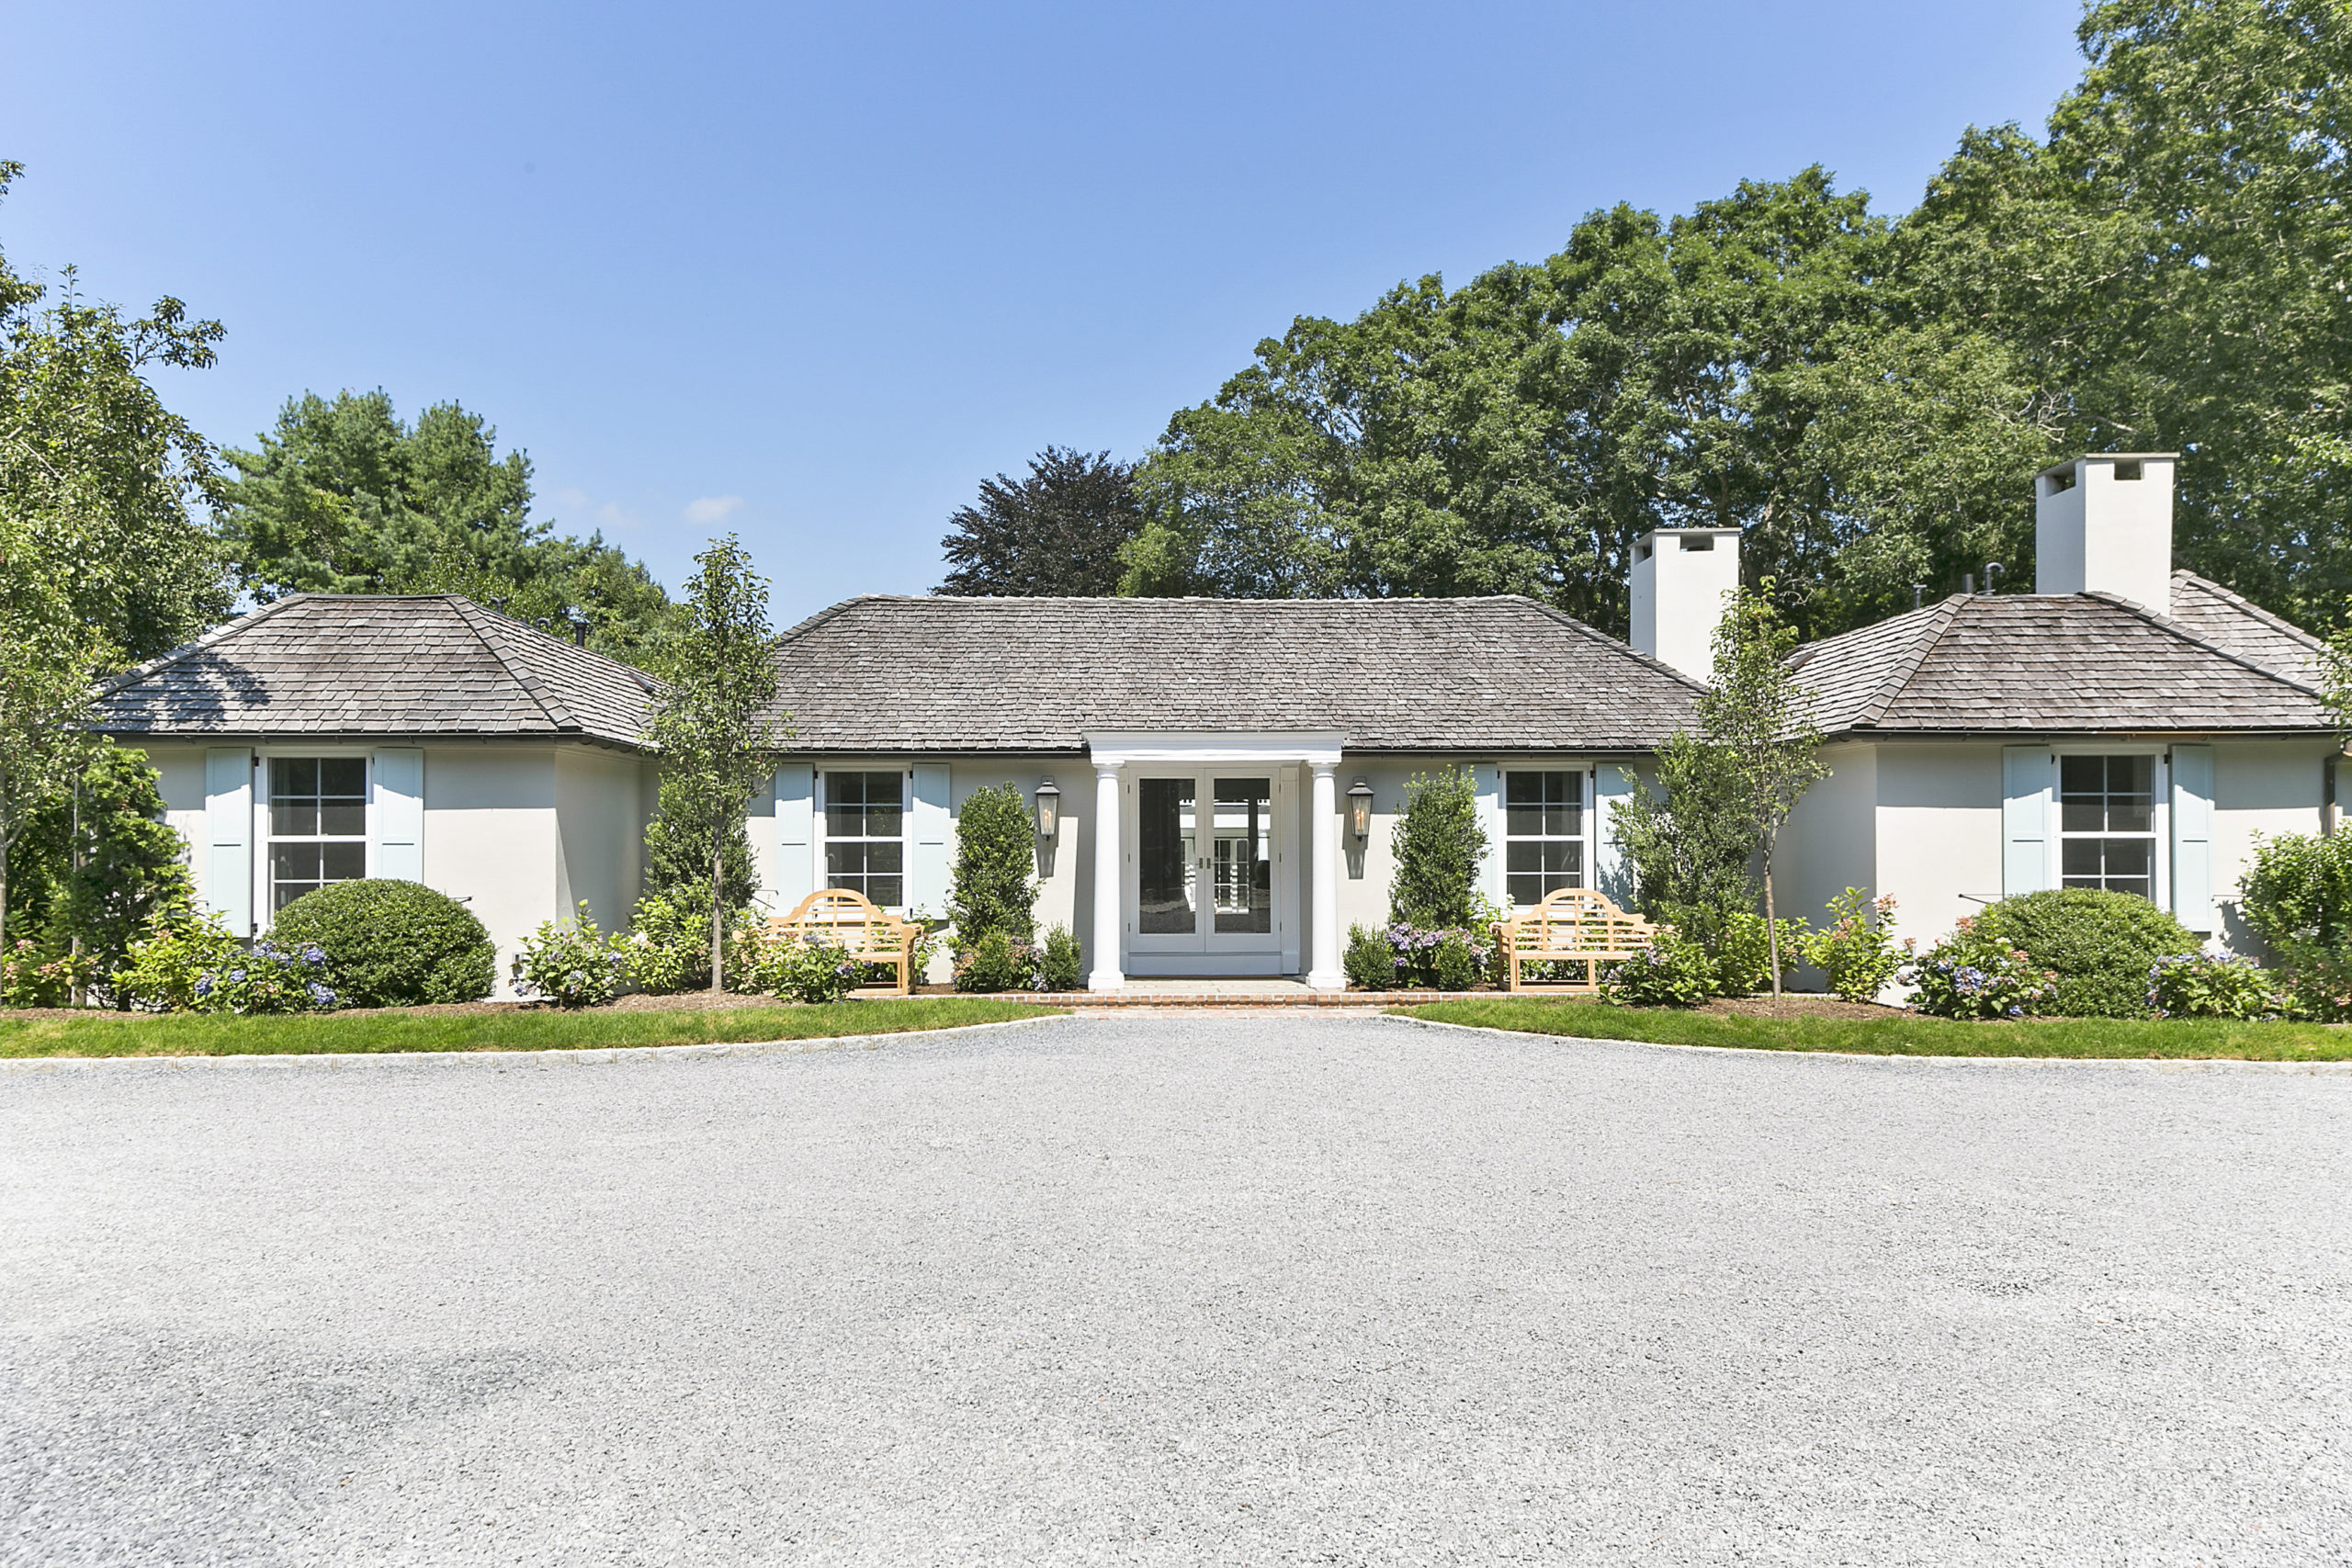 Racheal Ray sold her Tuckahoe Lane home in Southampton for $3.25 million.